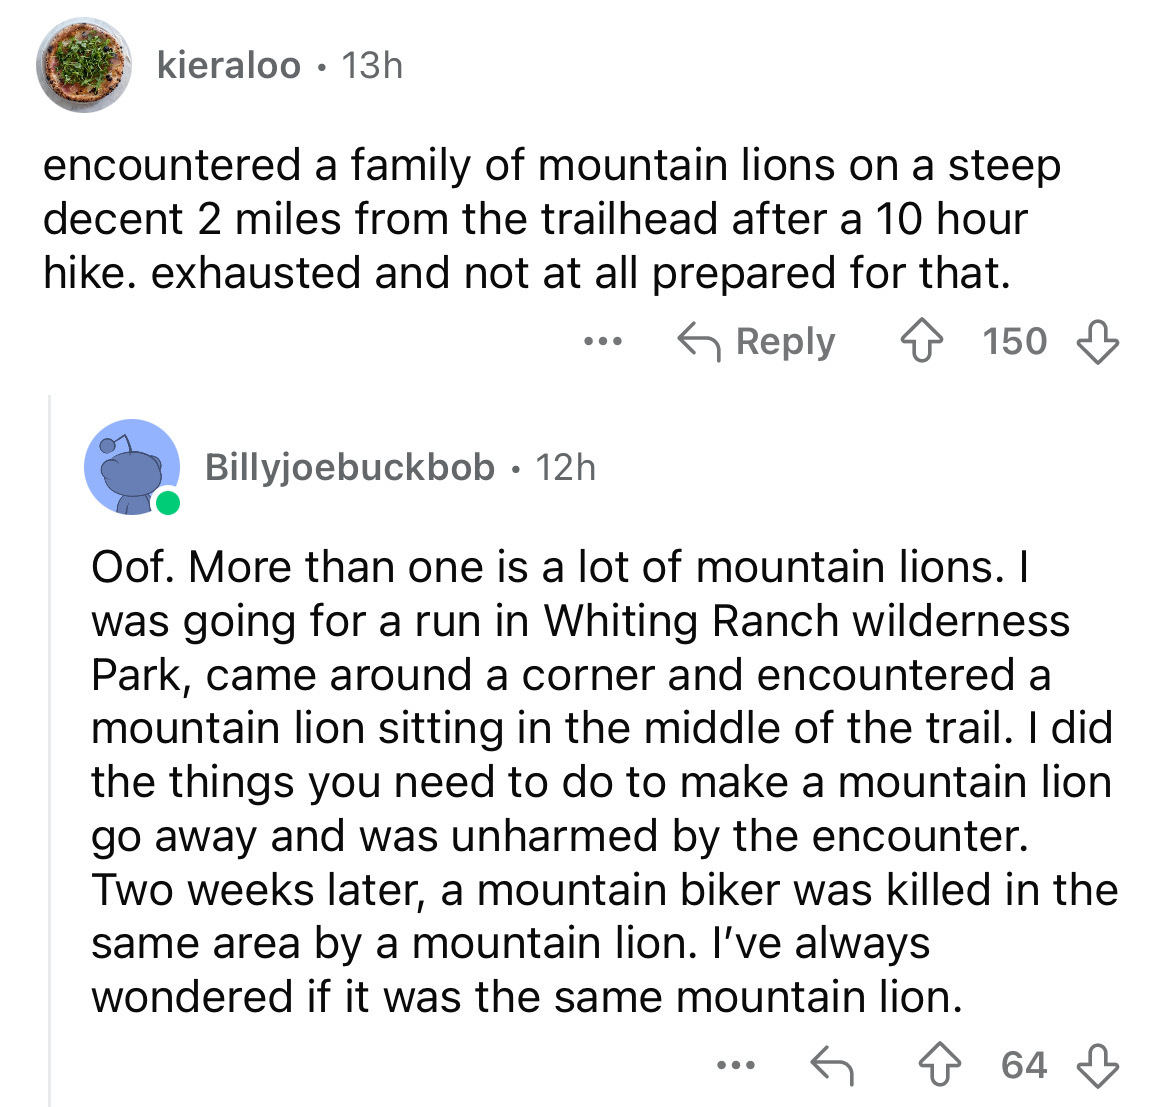 screenshot - kieraloo 13h . encountered a family of mountain lions on a steep decent 2 miles from the trailhead after a 10 hour hike. exhausted and not at all prepared for that. ... 150 Billyjoebuckbob 12h . Oof. More than one is a lot of mountain lions. 